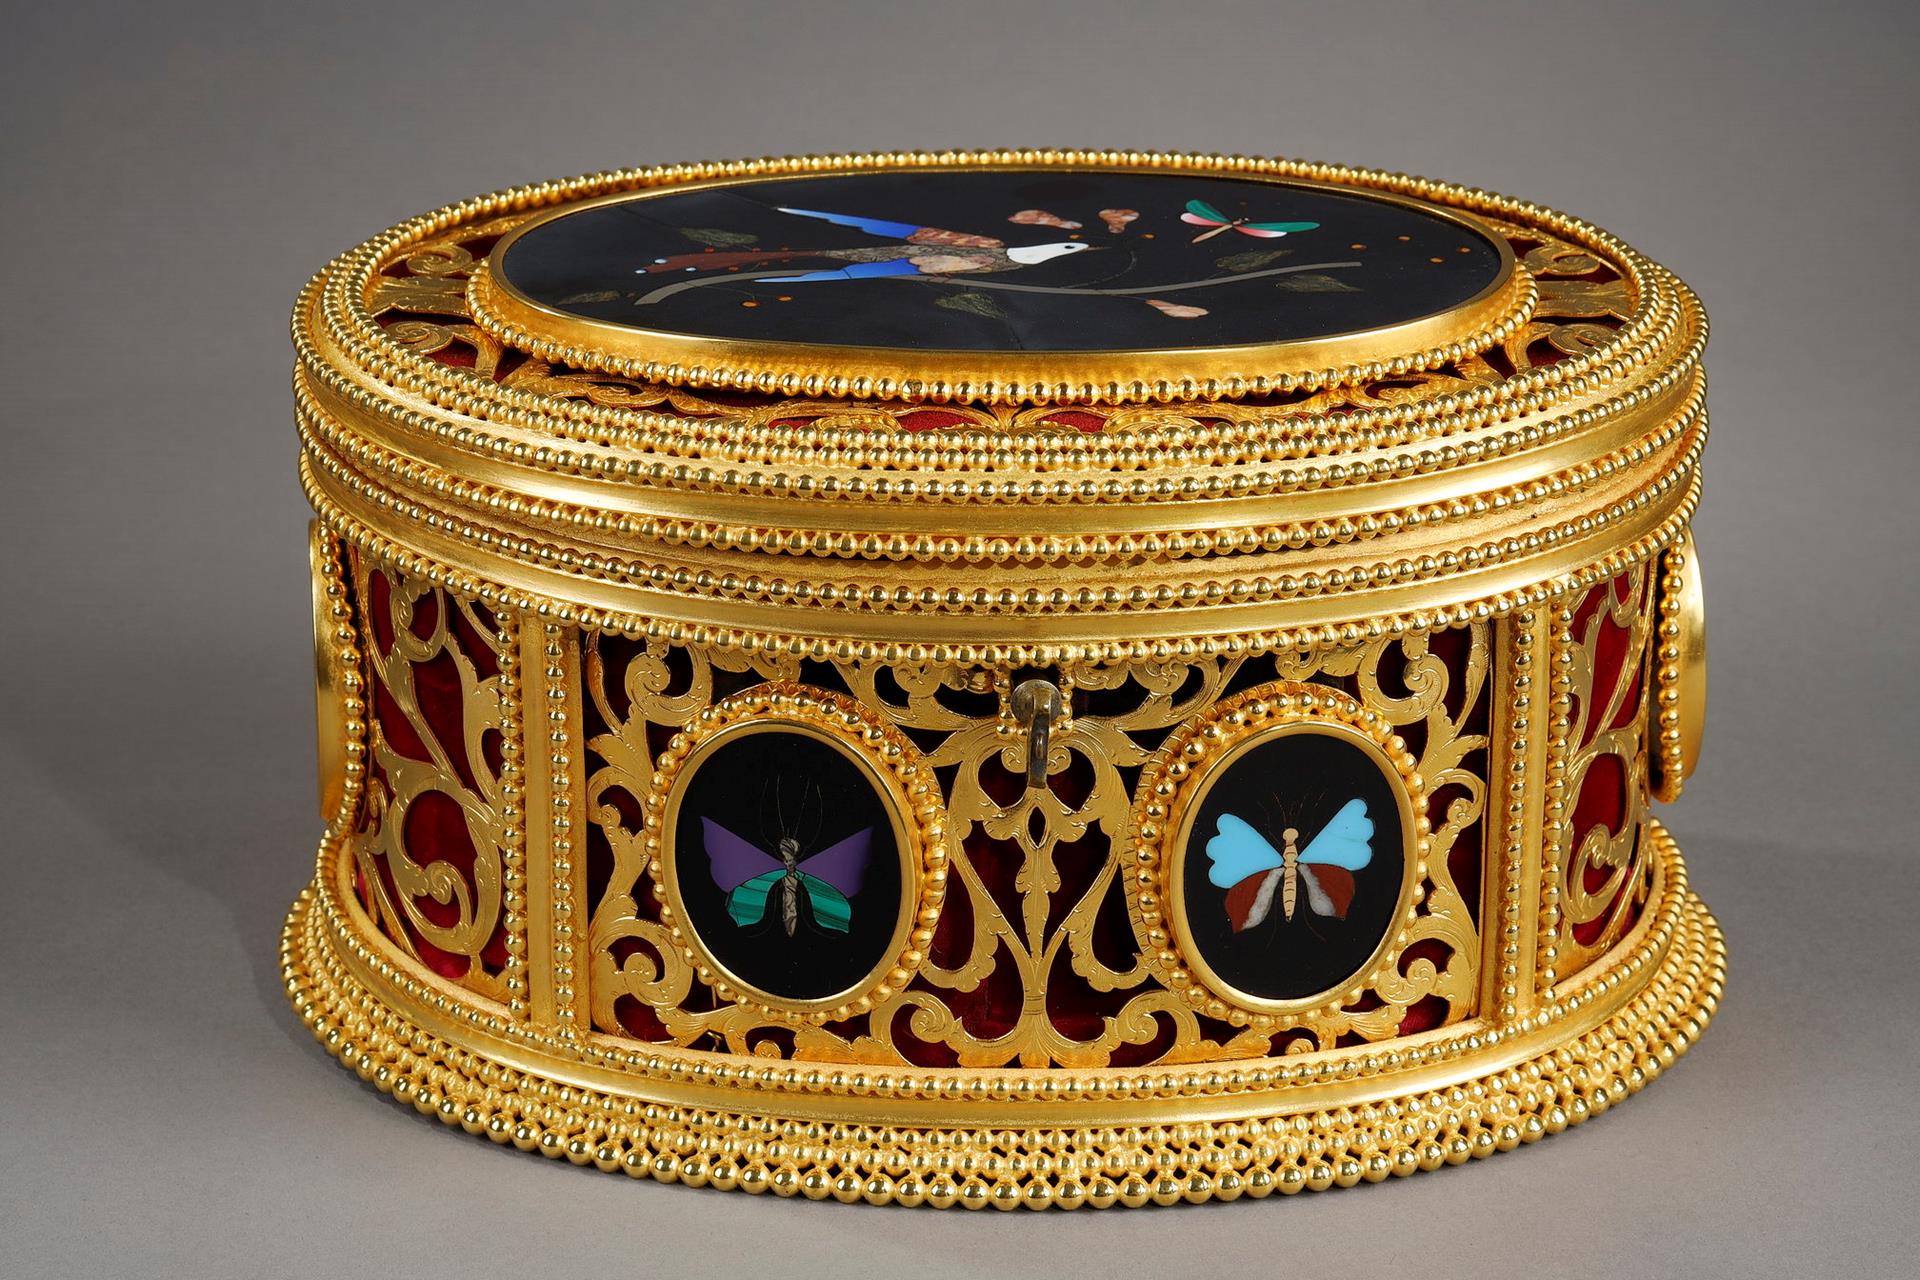 A 19th century jewellery box in pietra dura ormulu mounted by Tahan.